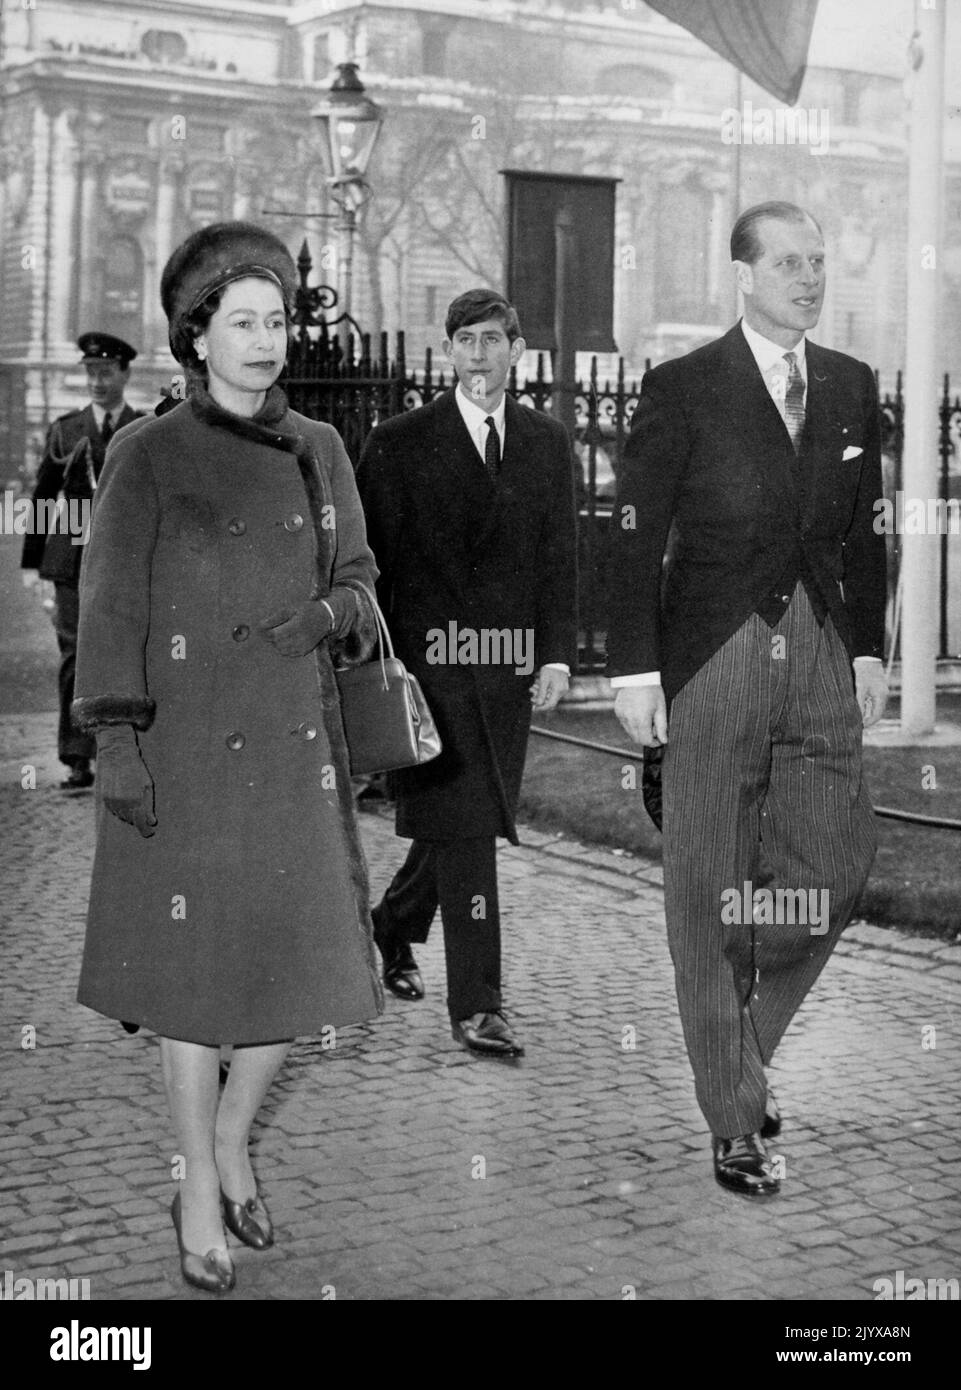 File photo dated 28/12/1965 of Queen Elizabeth II and the Duke of Edinburgh, followed by Prince Charles, as they arrive at the West Door of Westminster Abbey, London, to attend with other members of the Royal family a service marking the 900th anniversary of the consecration of the first Abbey church in 1065. Being head of state was a full-time job and left the Queen as a young mother with limited time for her children. Nannies were called upon and boarding school was considered essential for the royal youngsters. It was also regarded as a progressive choice at the time and encouraged the Quee Stock Photo